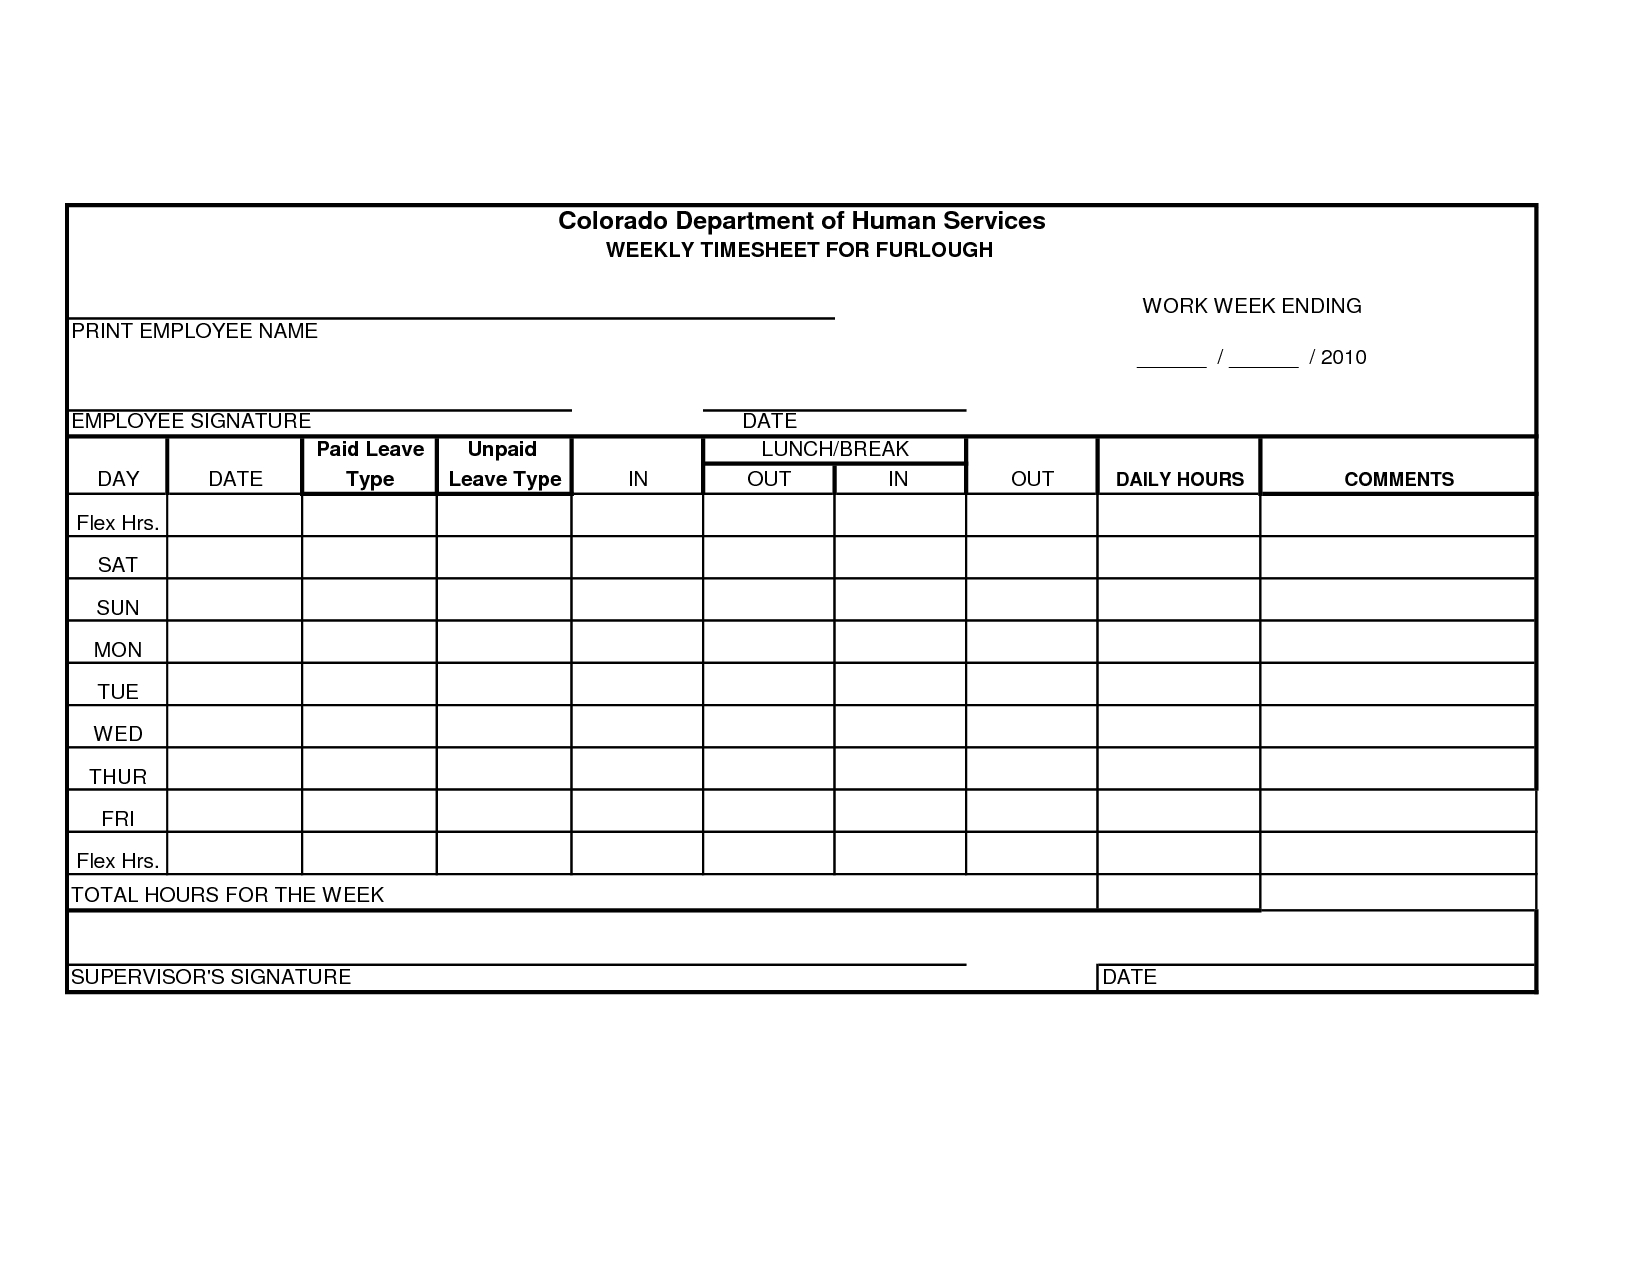 Time Sheets Template New Free Printable Time Sheets Forms Furlough - Free Printable Time Sheets Forms